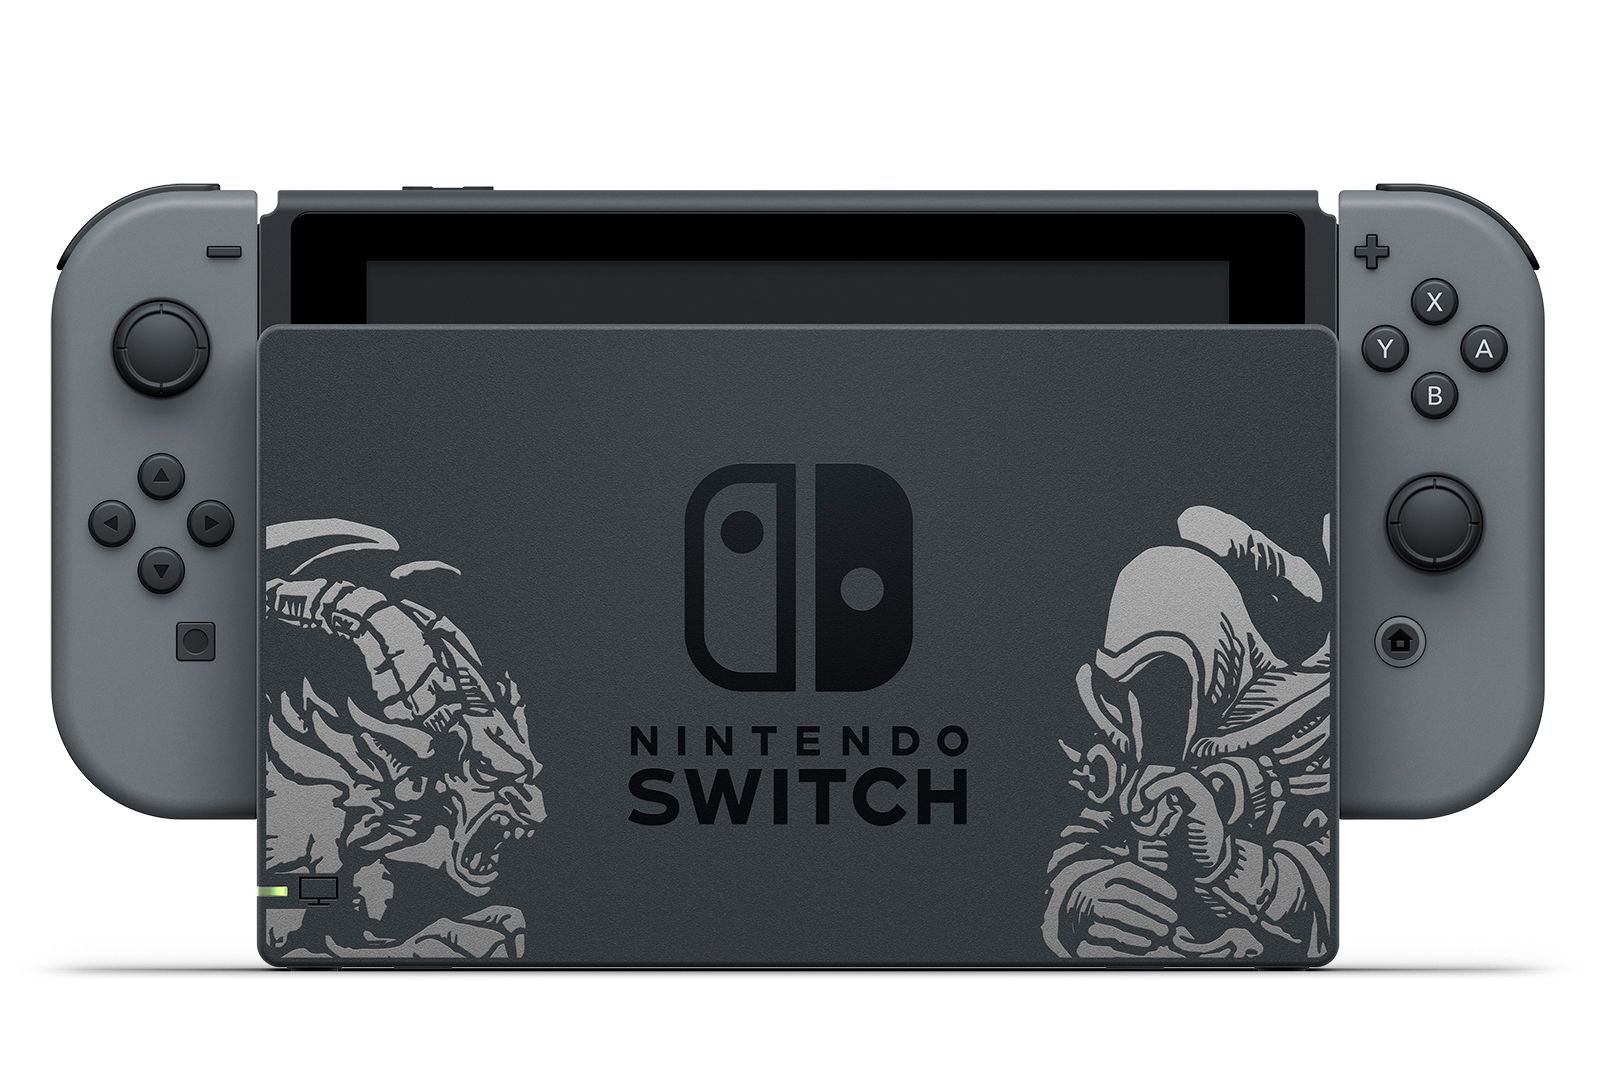 Diablo III Nintendo Switch bundle available for pre-order comes with carrying case image 1